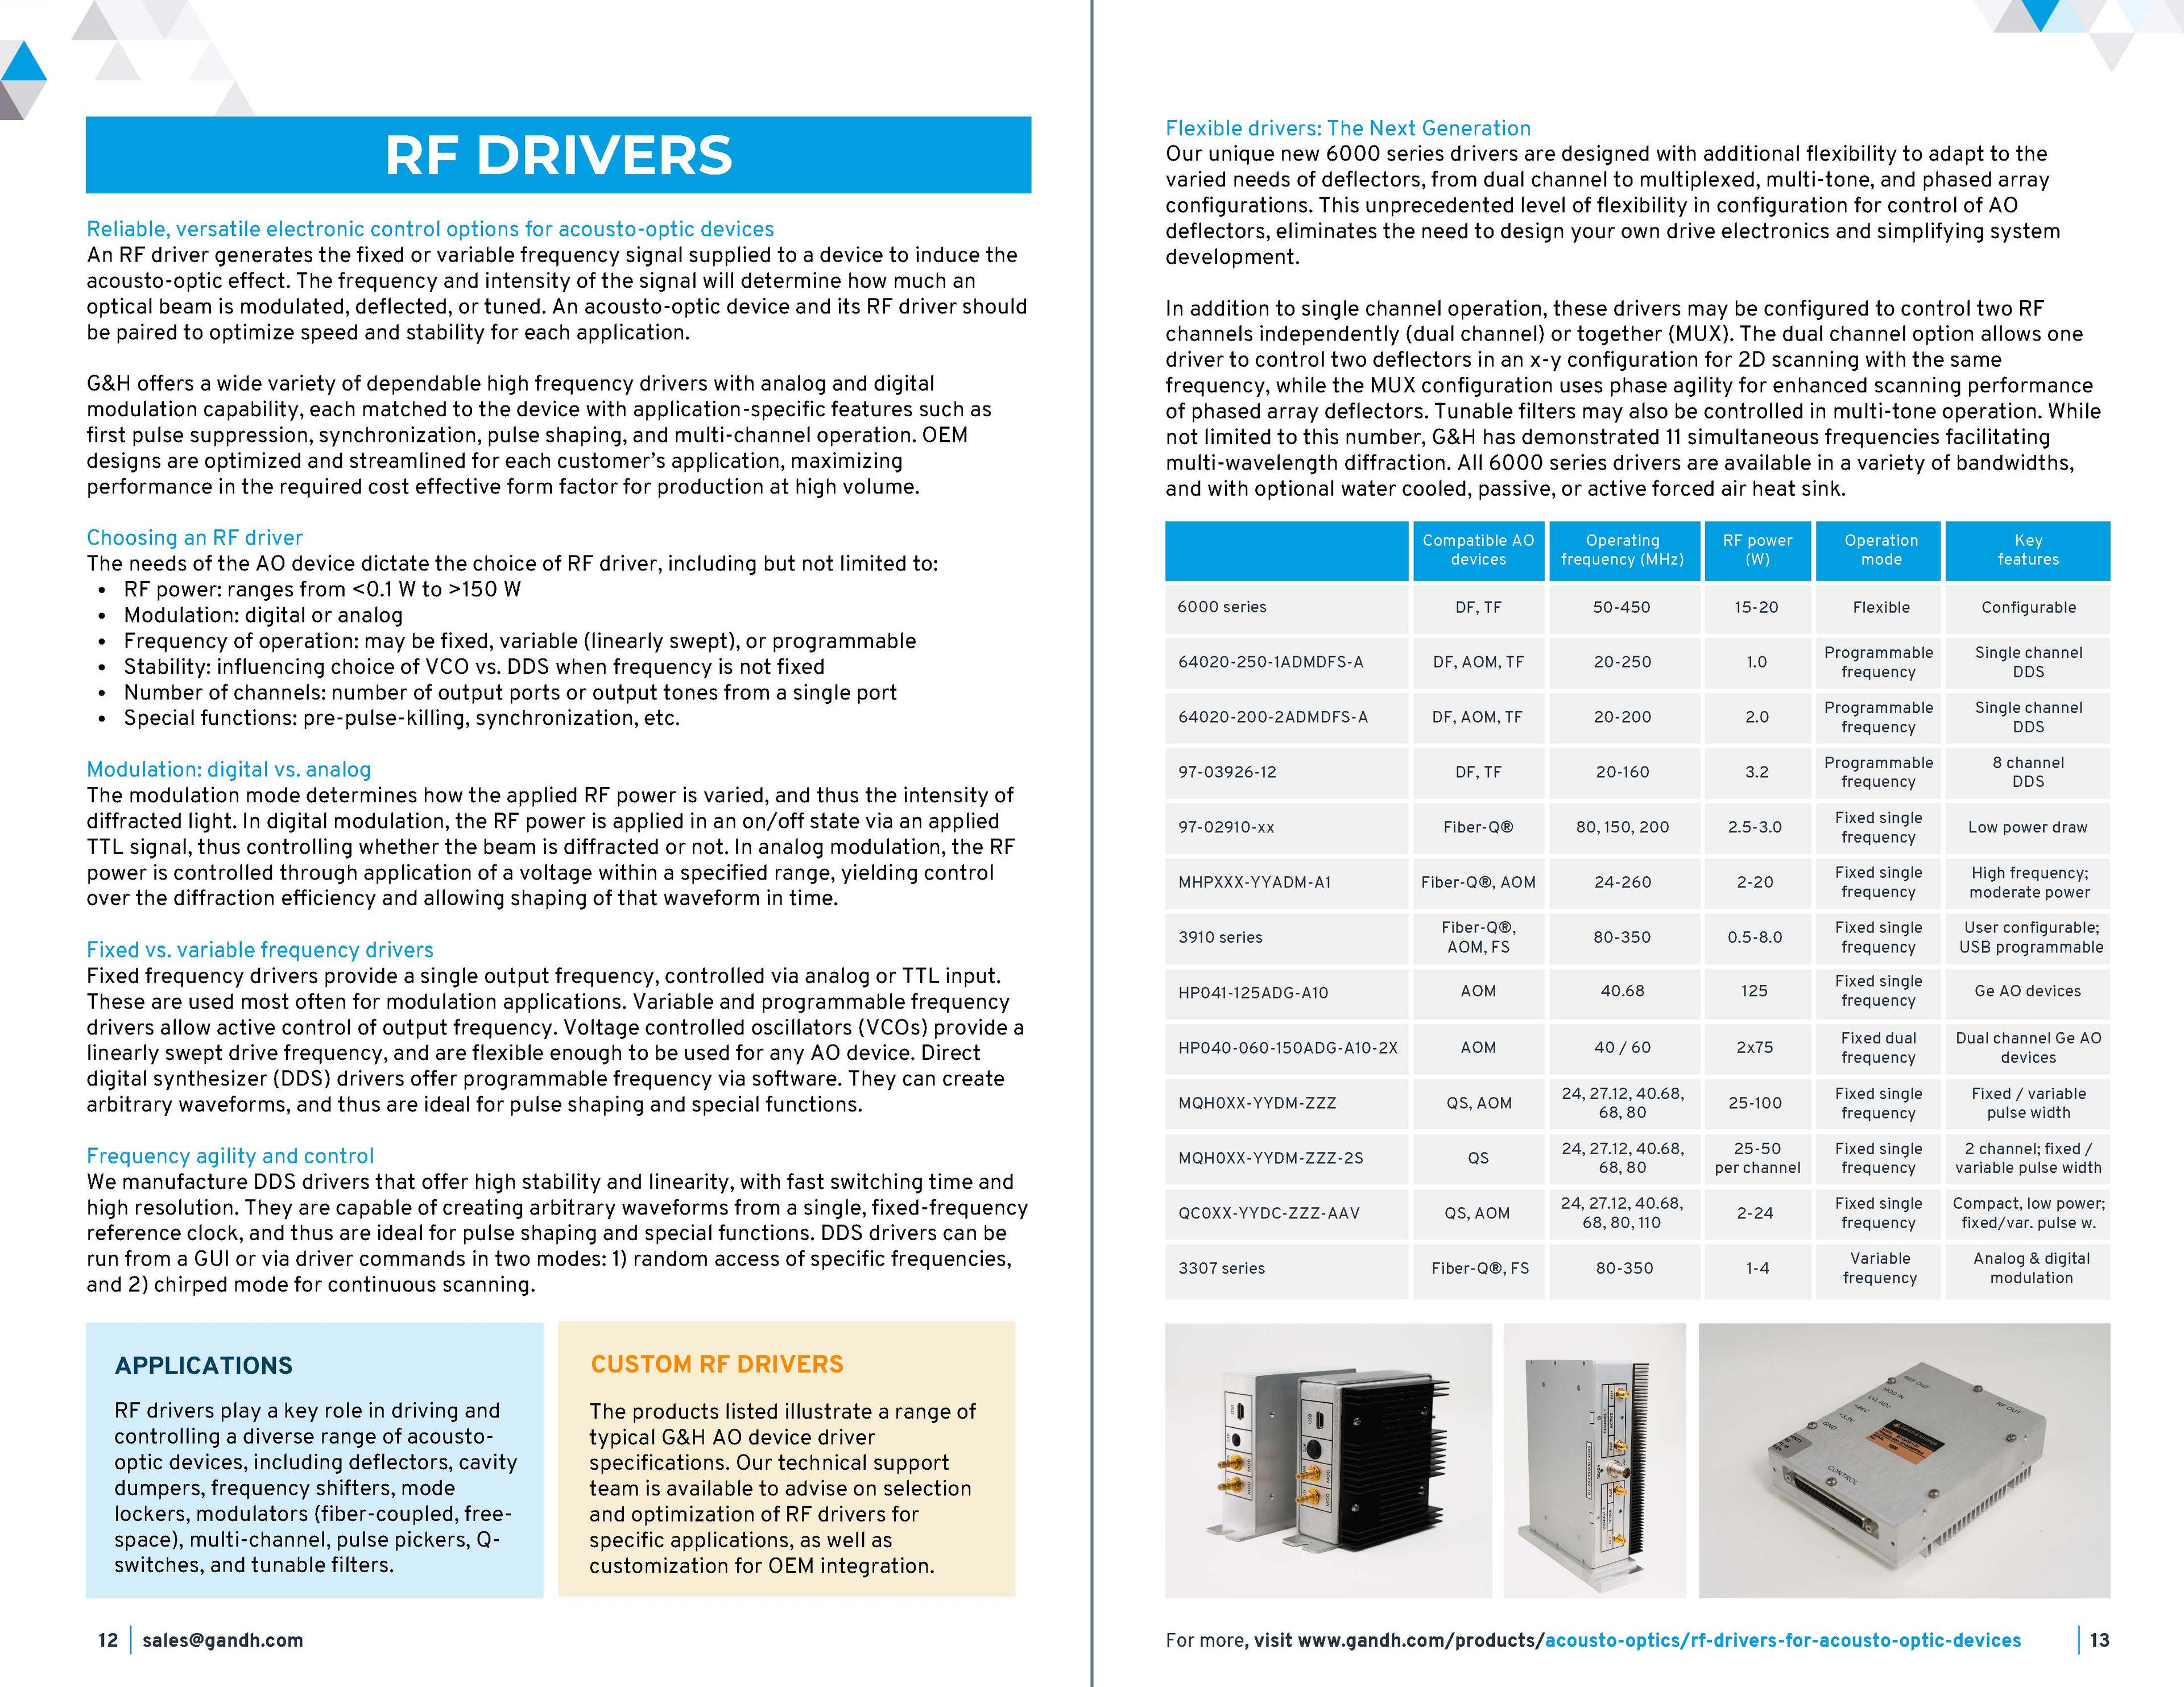 G&H Product & Solutions Guide - Acousto-Optics Page 12-13